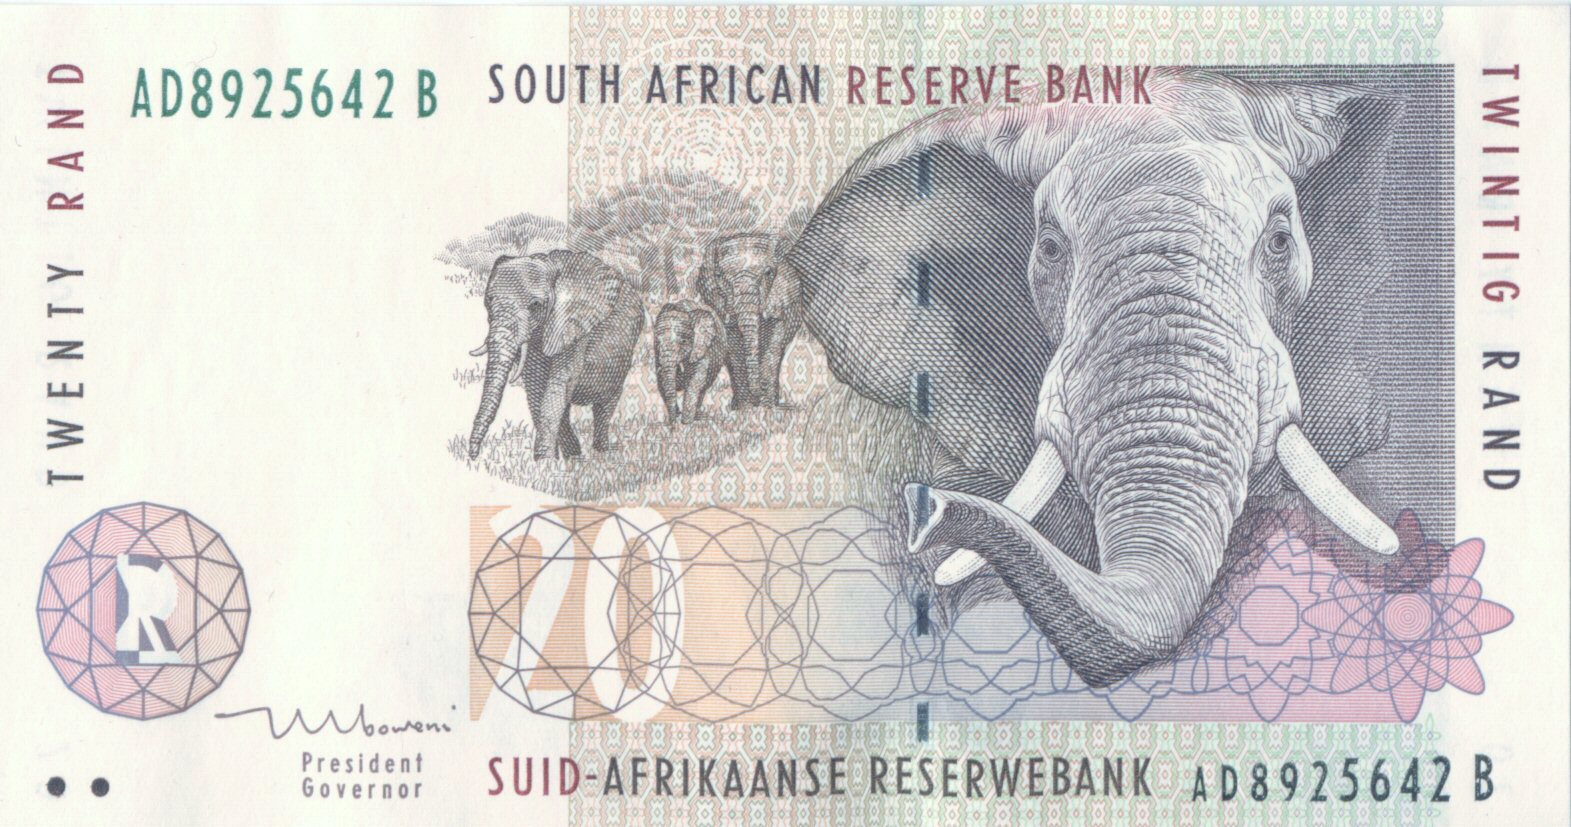 ZAR to USD: South African Rand to Dollar Exchange Rate1571 x 827